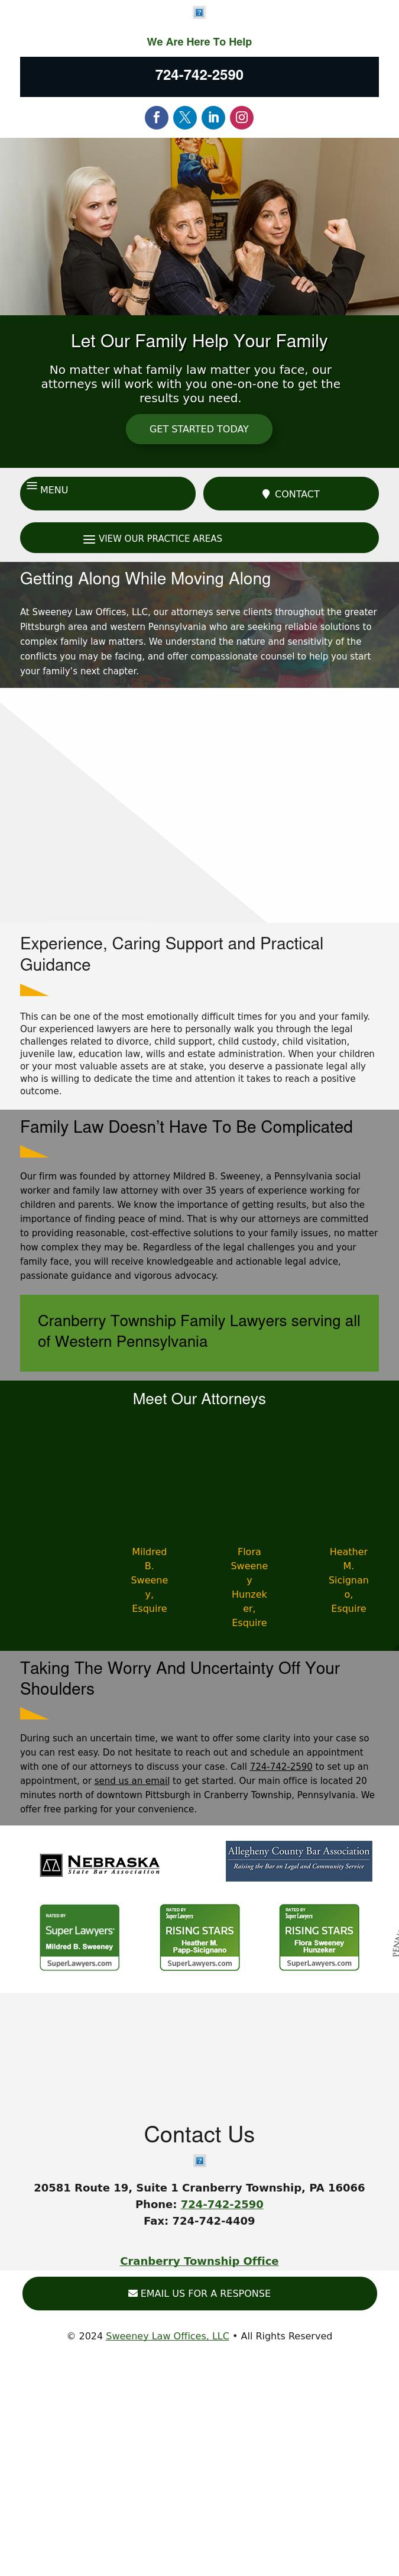 Sweeney Law Offices - Pittsburgh PA Lawyers